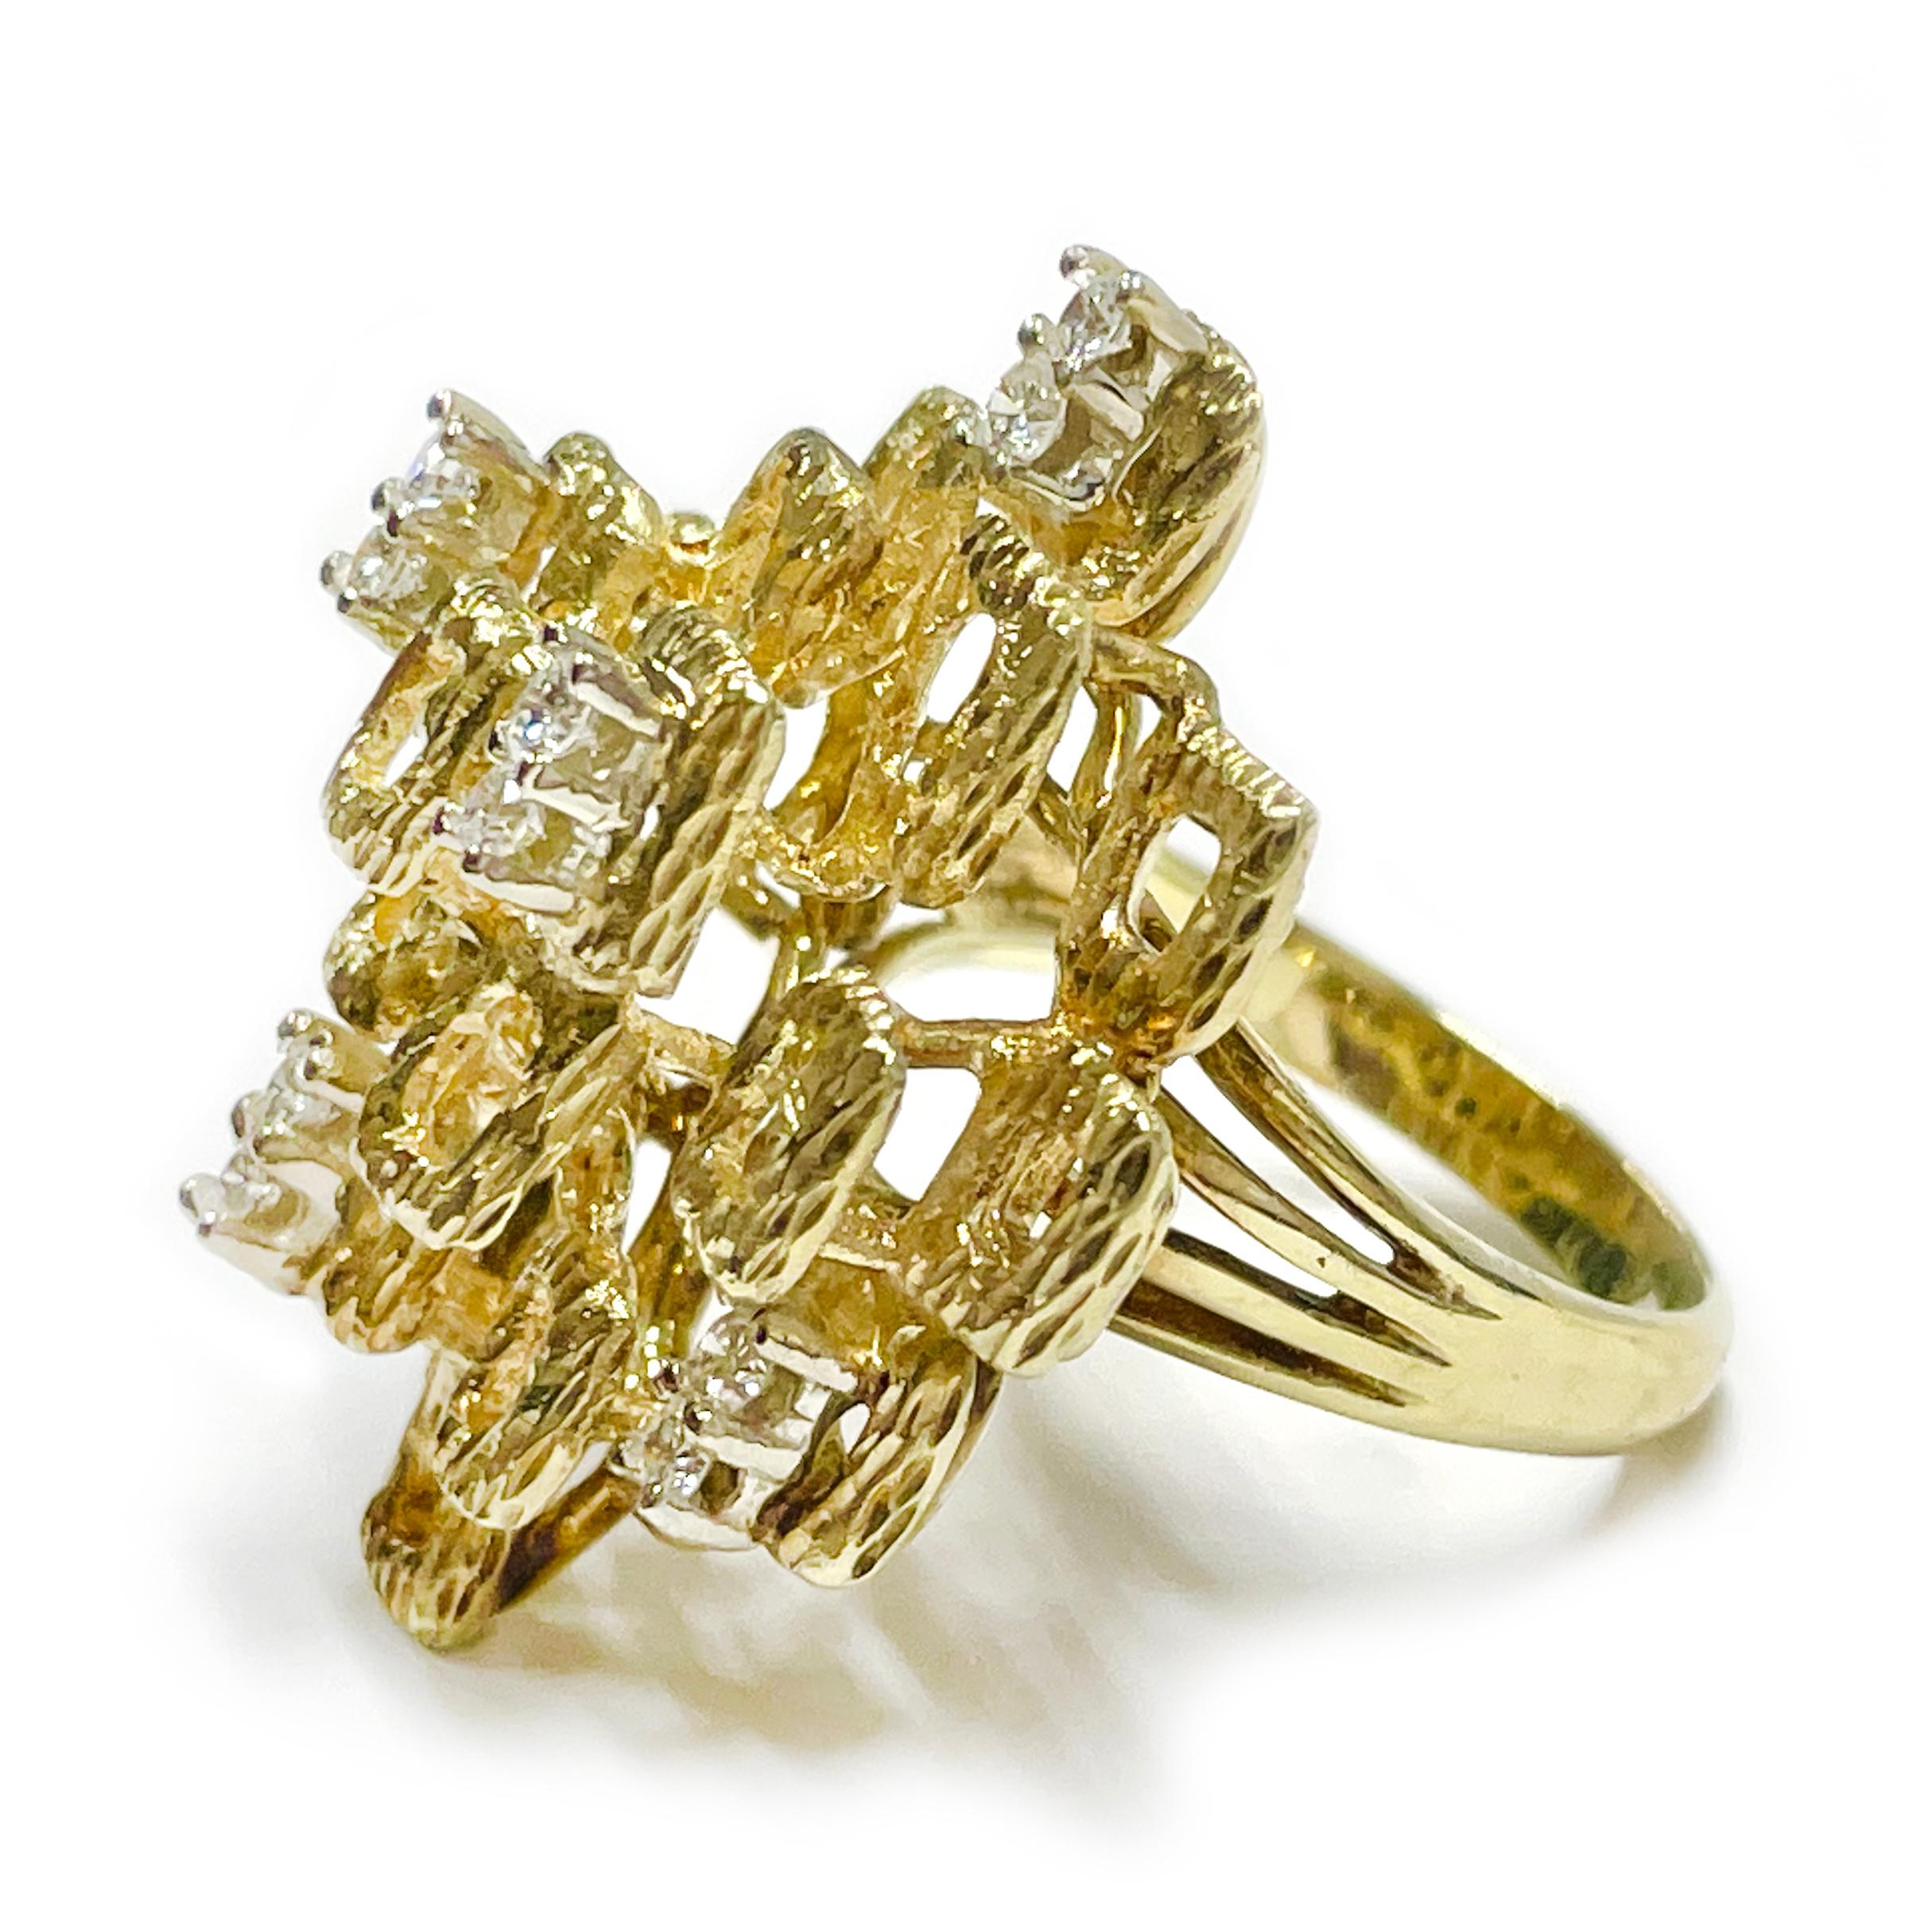 Retro Multi-Tier 14 Karat Yellow Gold Diamond Ring, circa the 1980s. The unique design features textured gold open squares with ten 2mm round prong-set diamonds for a total carat weight of 0.30ctw. This multi-tier square pattern ring with diamond